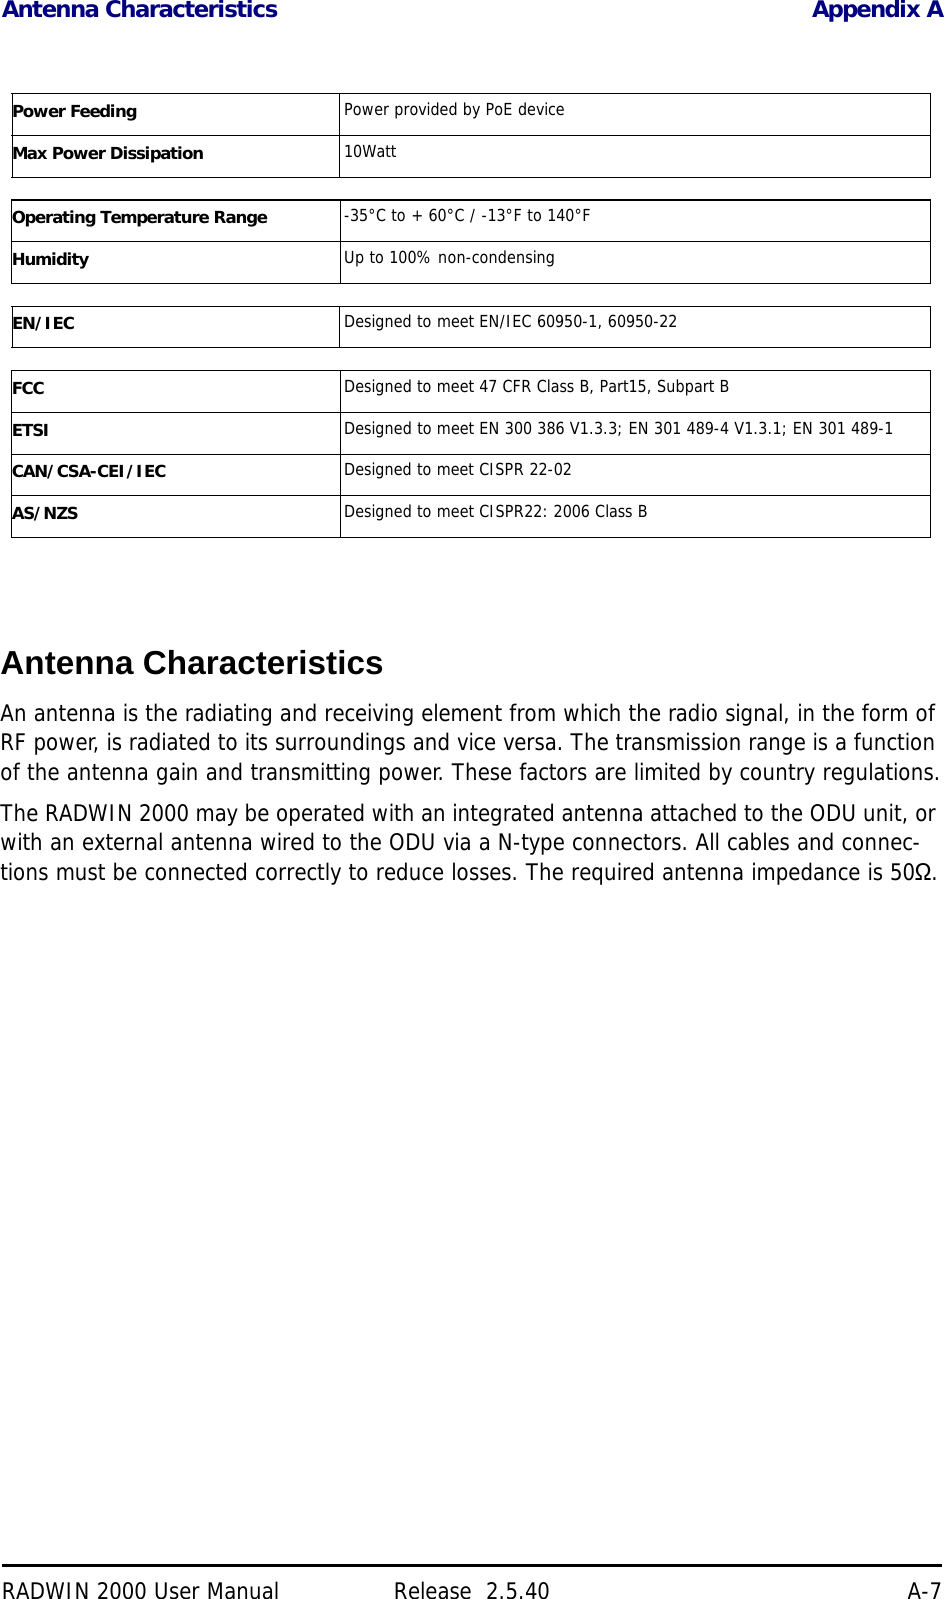 Antenna Characteristics Appendix ARADWIN 2000 User Manual Release  2.5.40 A-7Antenna CharacteristicsAn antenna is the radiating and receiving element from which the radio signal, in the form of RF power, is radiated to its surroundings and vice versa. The transmission range is a function of the antenna gain and transmitting power. These factors are limited by country regulations.The RADWIN 2000 may be operated with an integrated antenna attached to the ODU unit, or with an external antenna wired to the ODU via a N-type connectors. All cables and connec-tions must be connected correctly to reduce losses. The required antenna impedance is 50Ω.  Power Feeding Power provided by PoE deviceMax Power Dissipation 10WattOperating Temperature Range -35°C to + 60°C / -13°F to 140°FHumidity Up to 100% non-condensingEN/IEC Designed to meet EN/IEC 60950-1, 60950-22FCC Designed to meet 47 CFR Class B, Part15, Subpart BETSI Designed to meet EN 300 386 V1.3.3; EN 301 489-4 V1.3.1; EN 301 489-1 CAN/CSA-CEI/IEC Designed to meet CISPR 22-02AS/NZS Designed to meet CISPR22: 2006 Class B